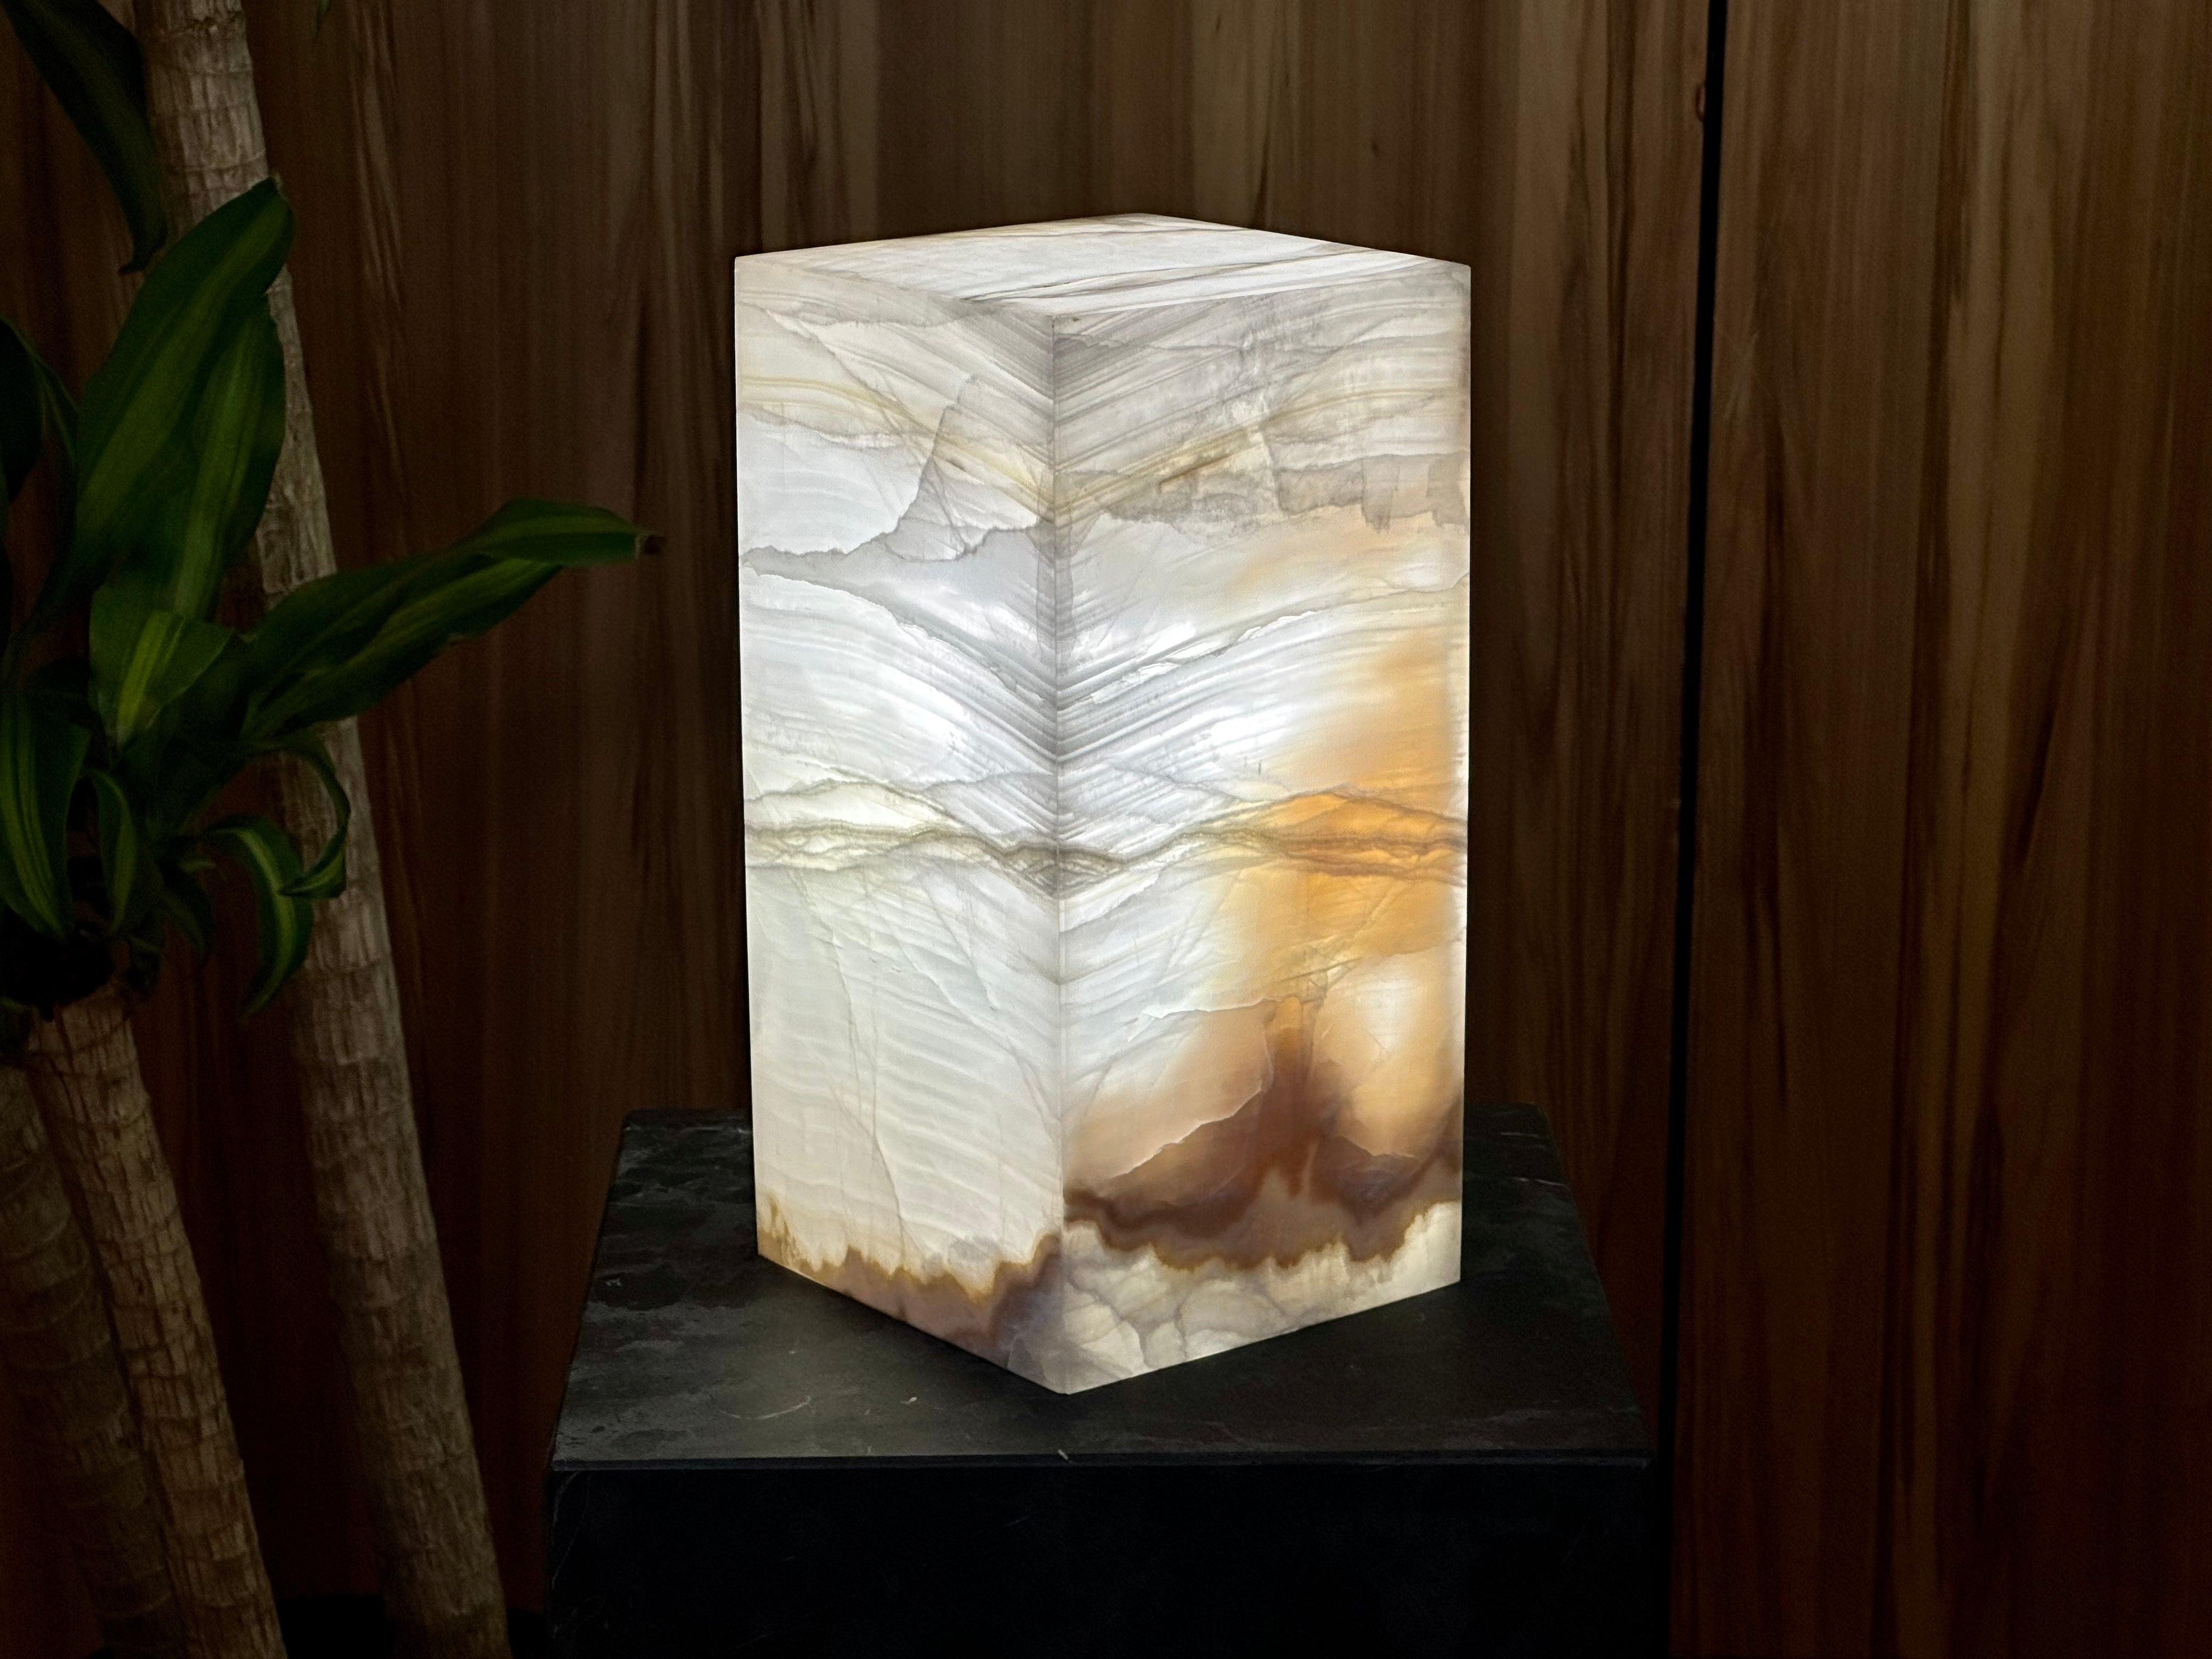 Artisanal Onyx Stone Table Lamp - This elegant Stone Table Lamp adds a touch of luxury to any space - Natural Onyx